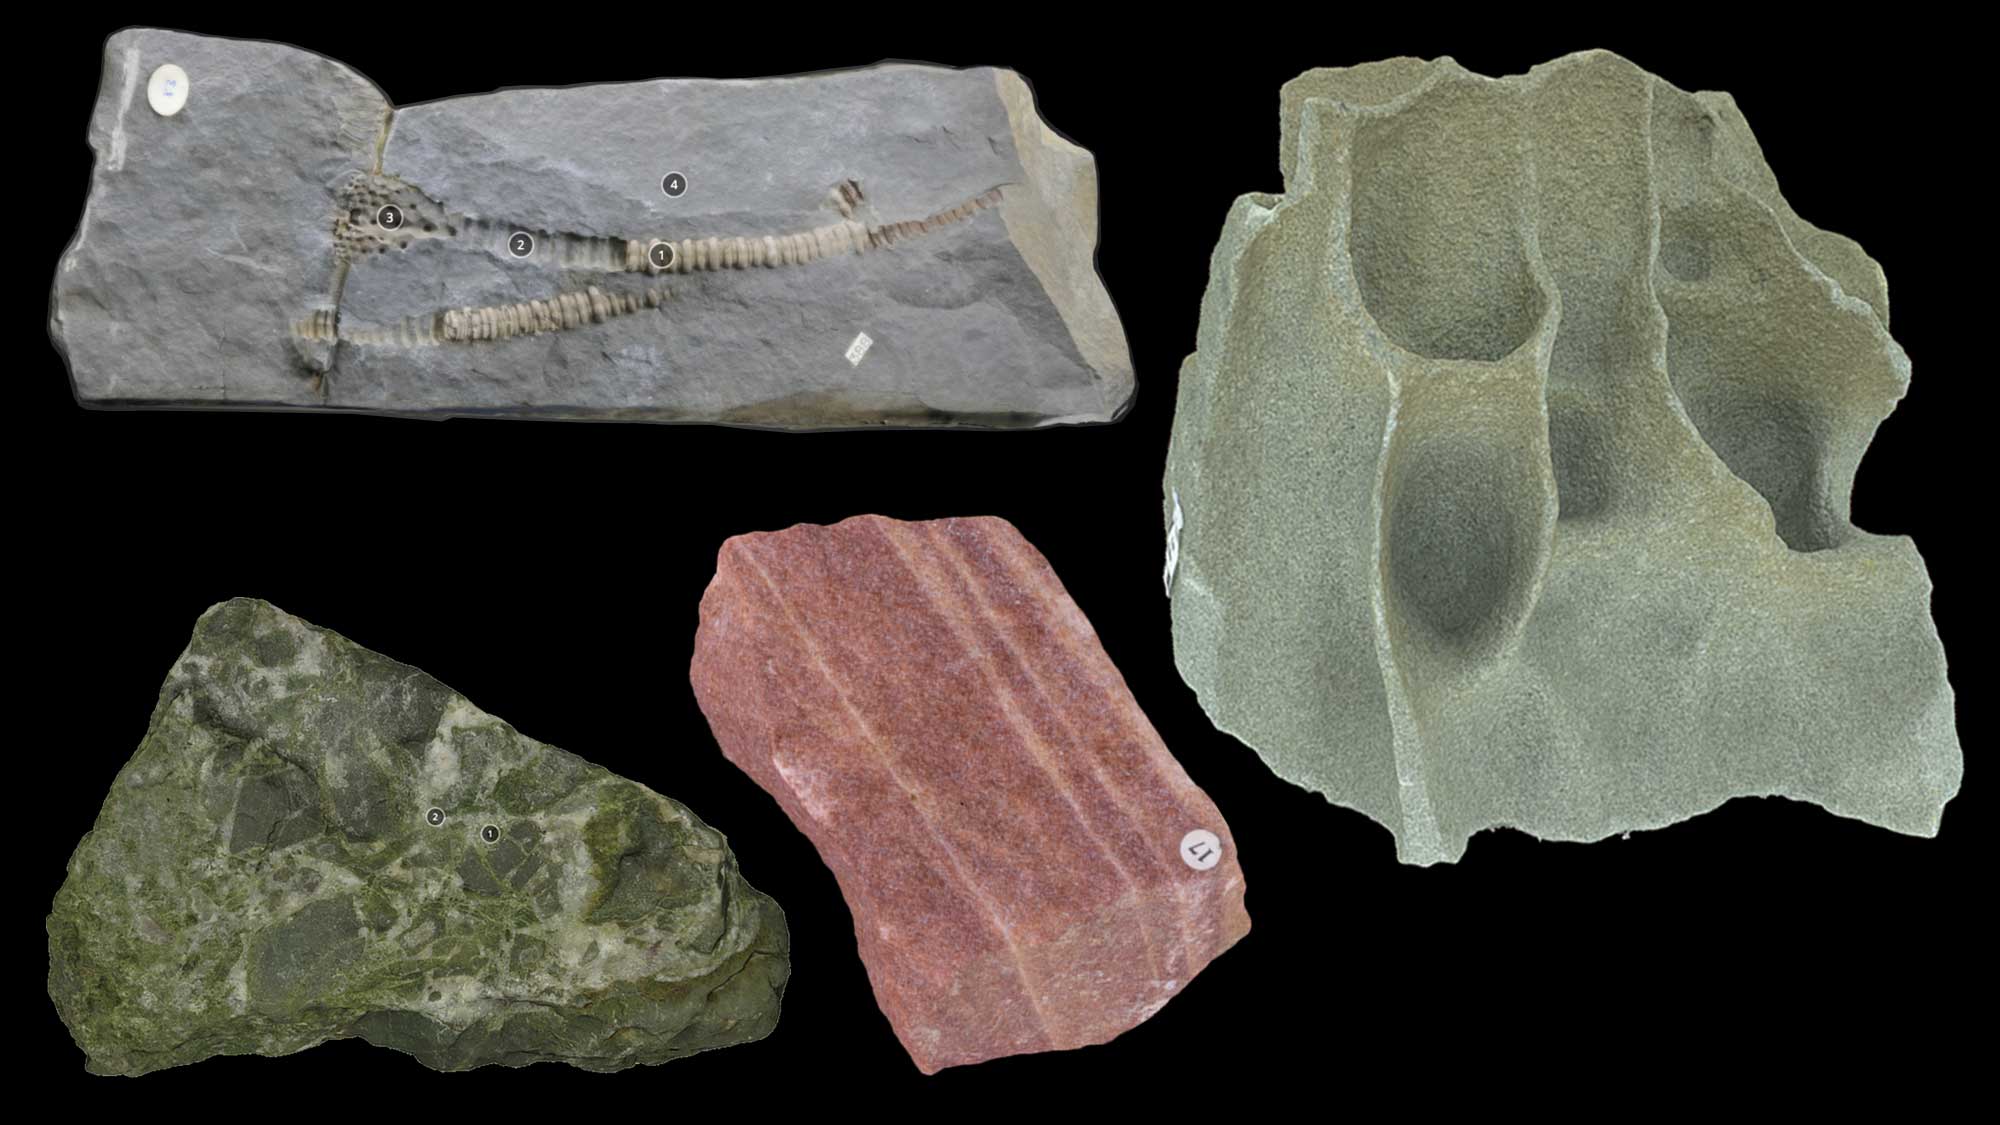 Image of various types of siliciclastic sedimentary rocks.